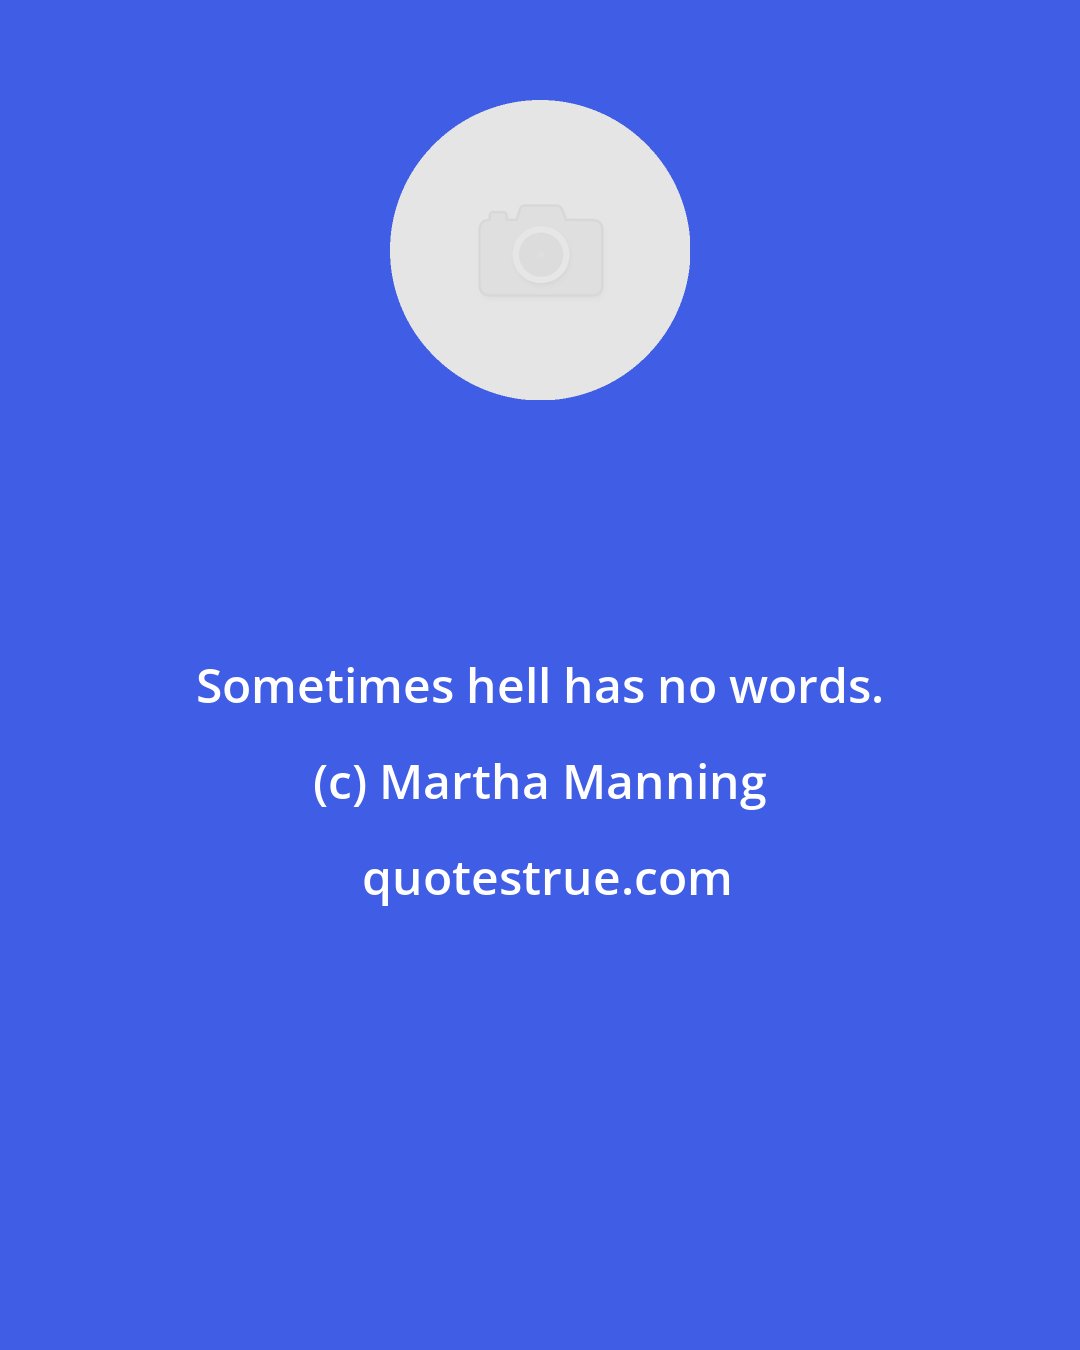 Martha Manning: Sometimes hell has no words.